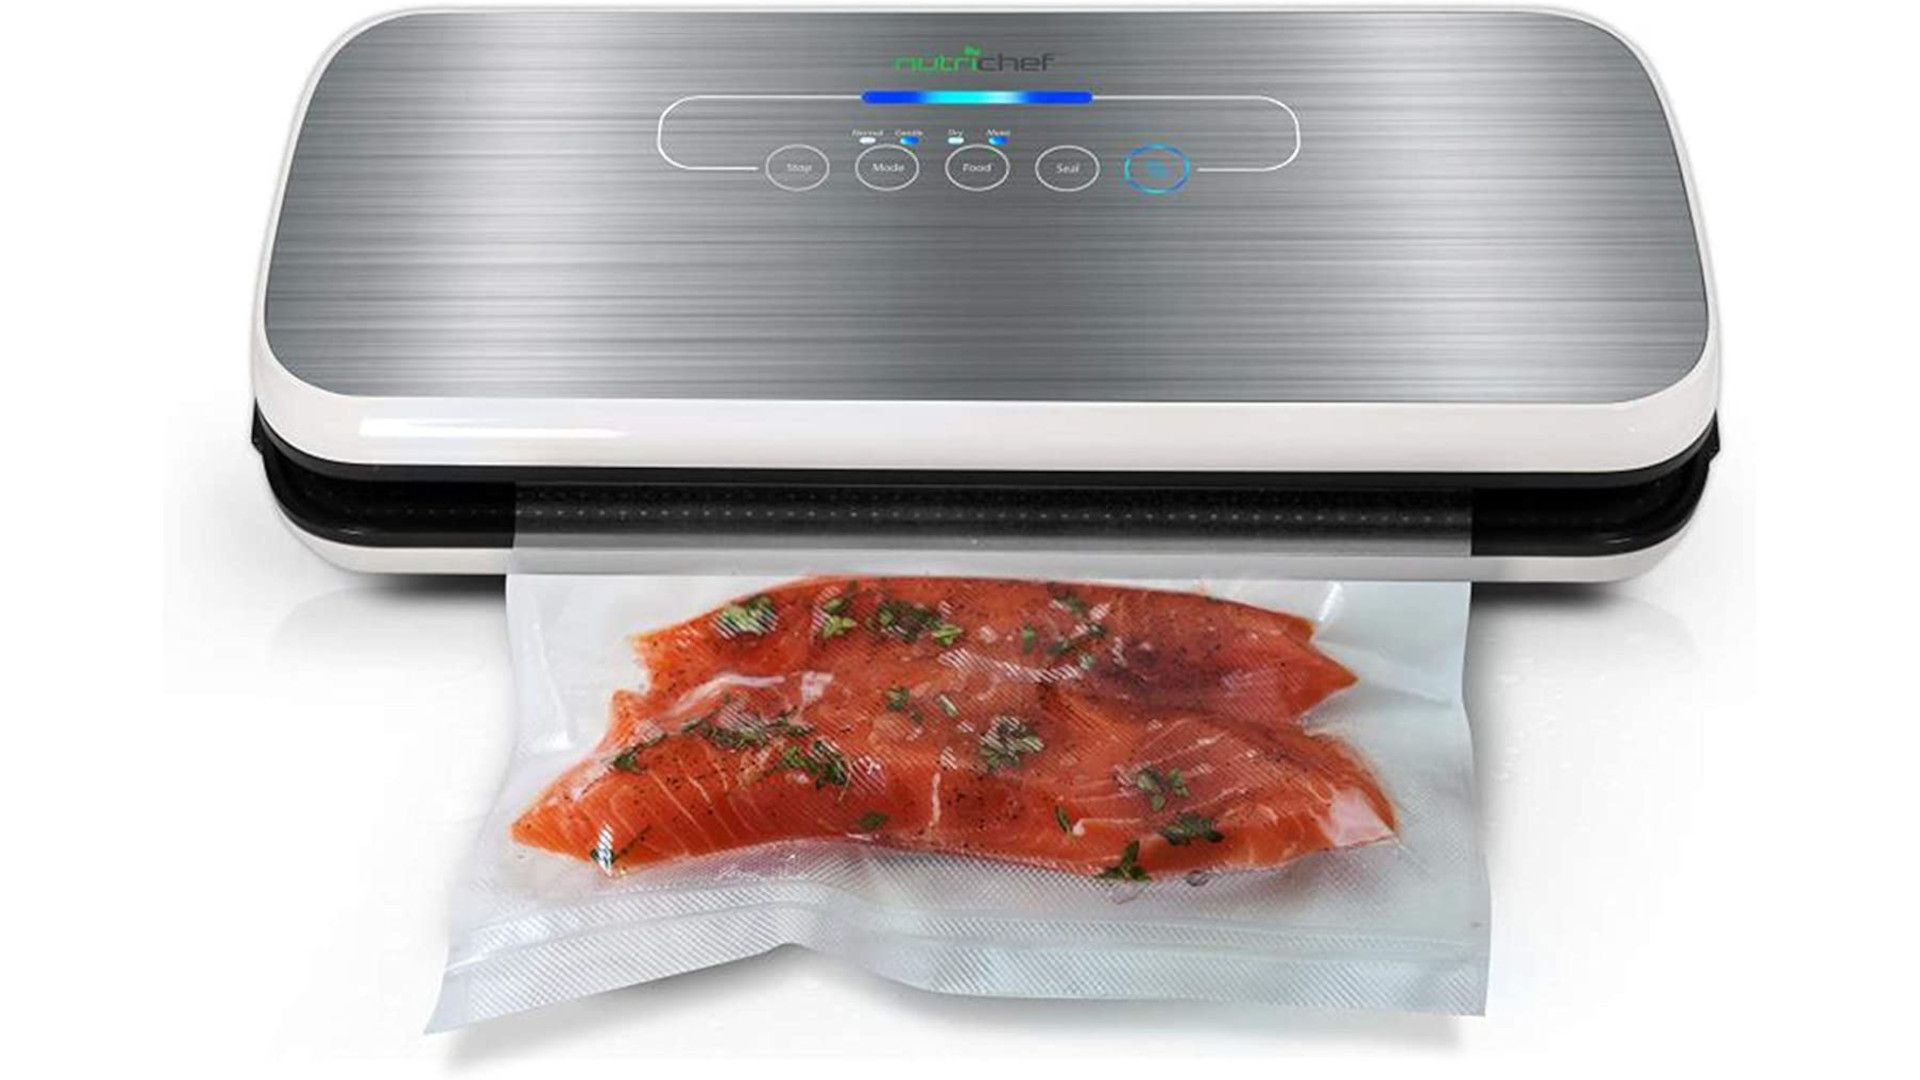 An automatic vacuum sealer is shown on a white background.